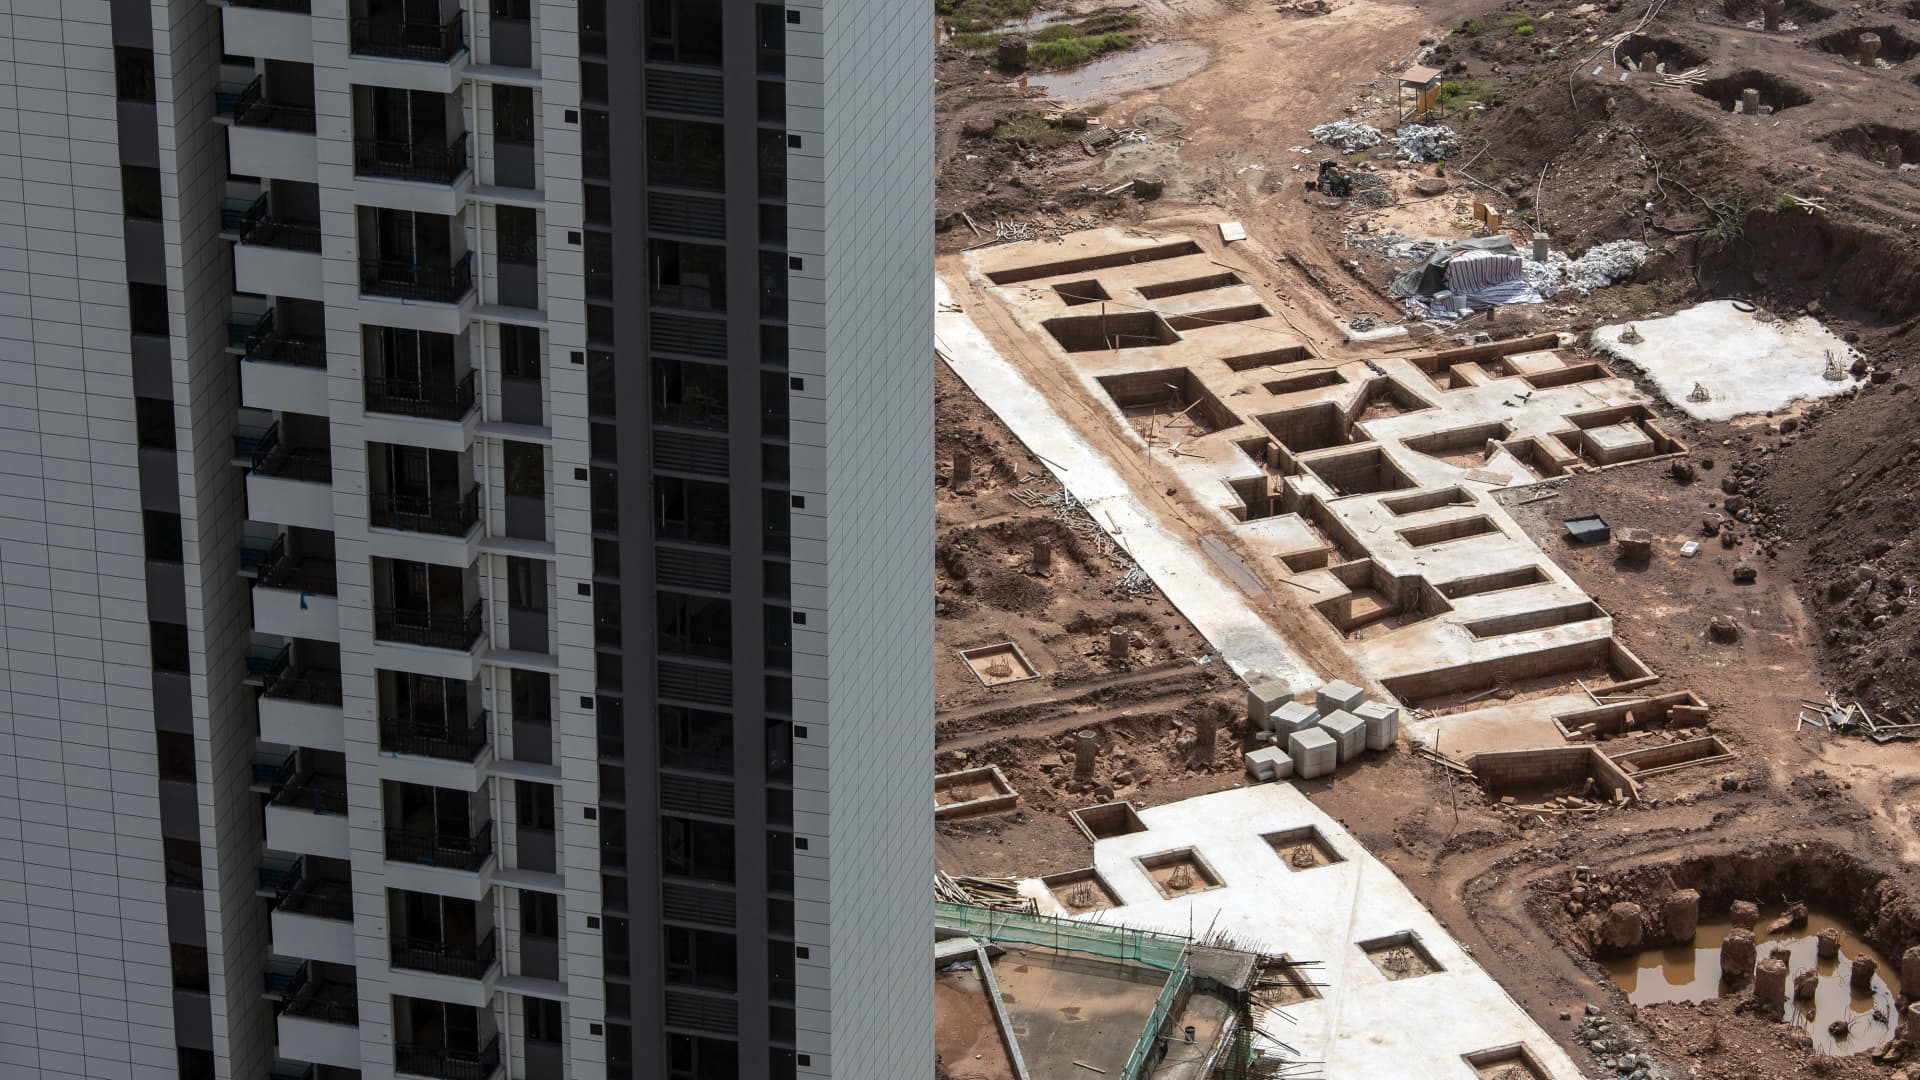 Residential buildings under construction in China